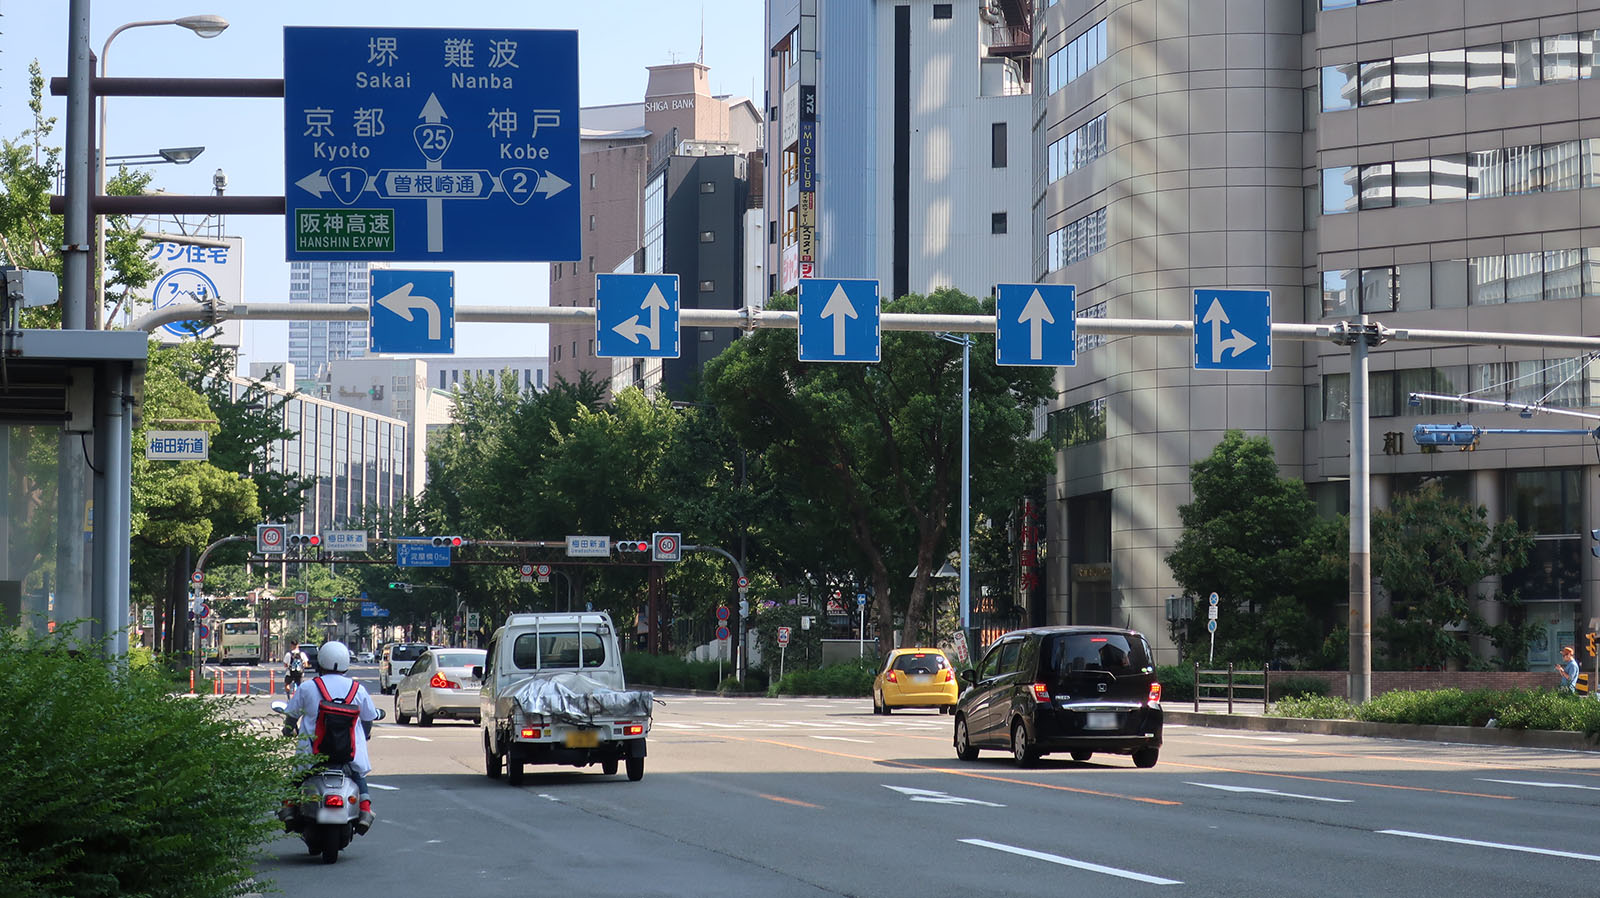 Figure 1: Terminus of National Route 1, 2, 25 and 176 in Osaka by Puchi-masashi - Own work, CC BY-SA 4.0 via Wikimedia Commons